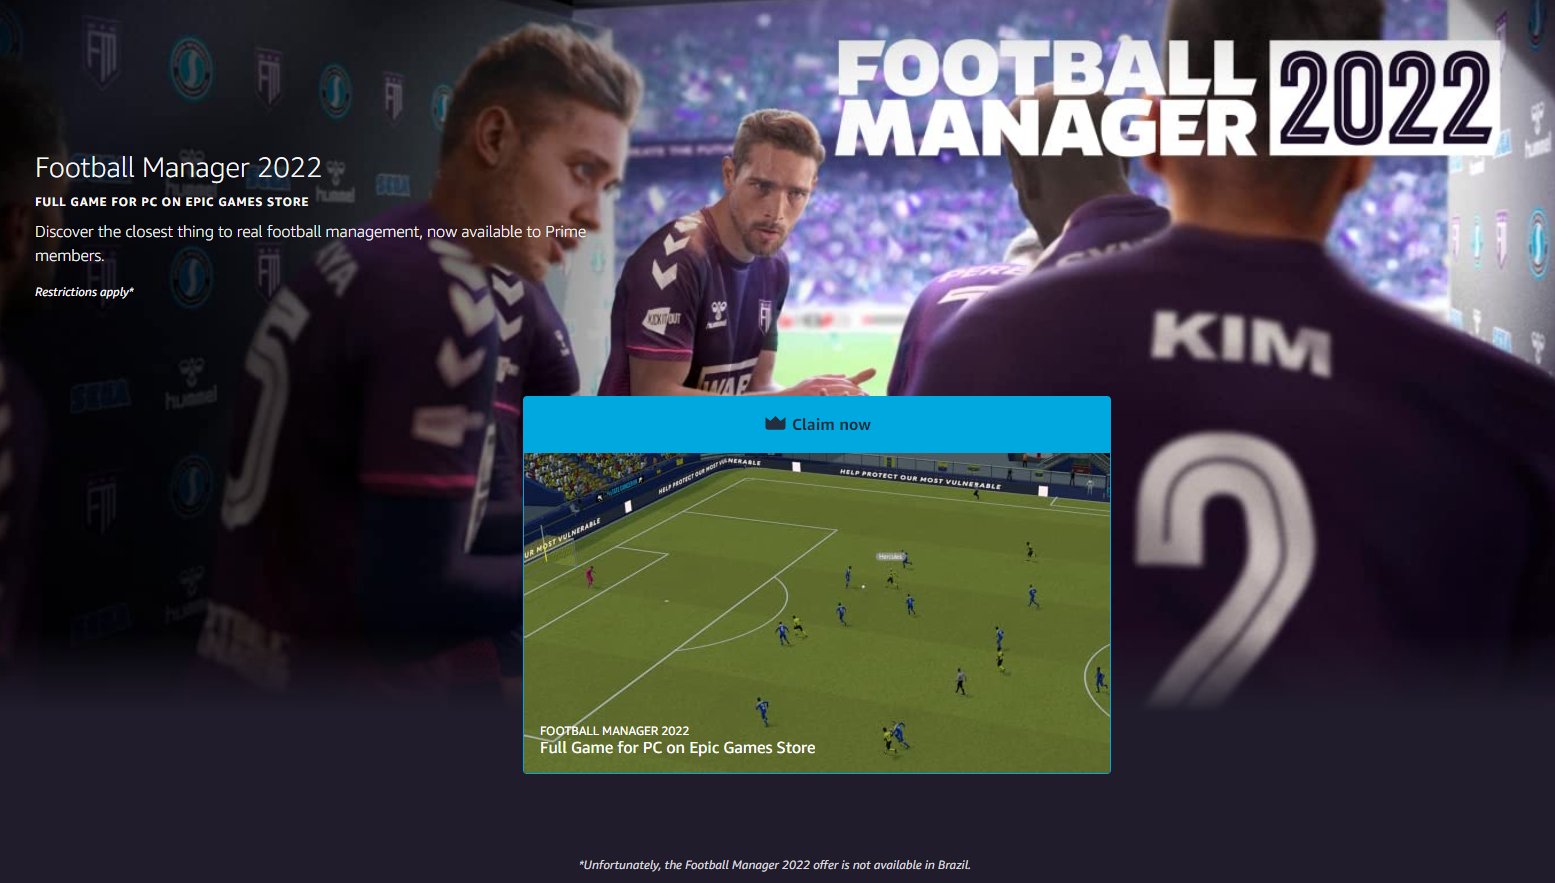 El actual Fahrenheit Rascacielos Wario64 on Twitter: "Football Manager 2022 (EGS) is free on Prime Gaming  https://t.co/axj7a02Qgm *Unfortunately, the Football Manager 2022 offer is  not available in Brazil. https://t.co/5efwpInPsa" / Twitter